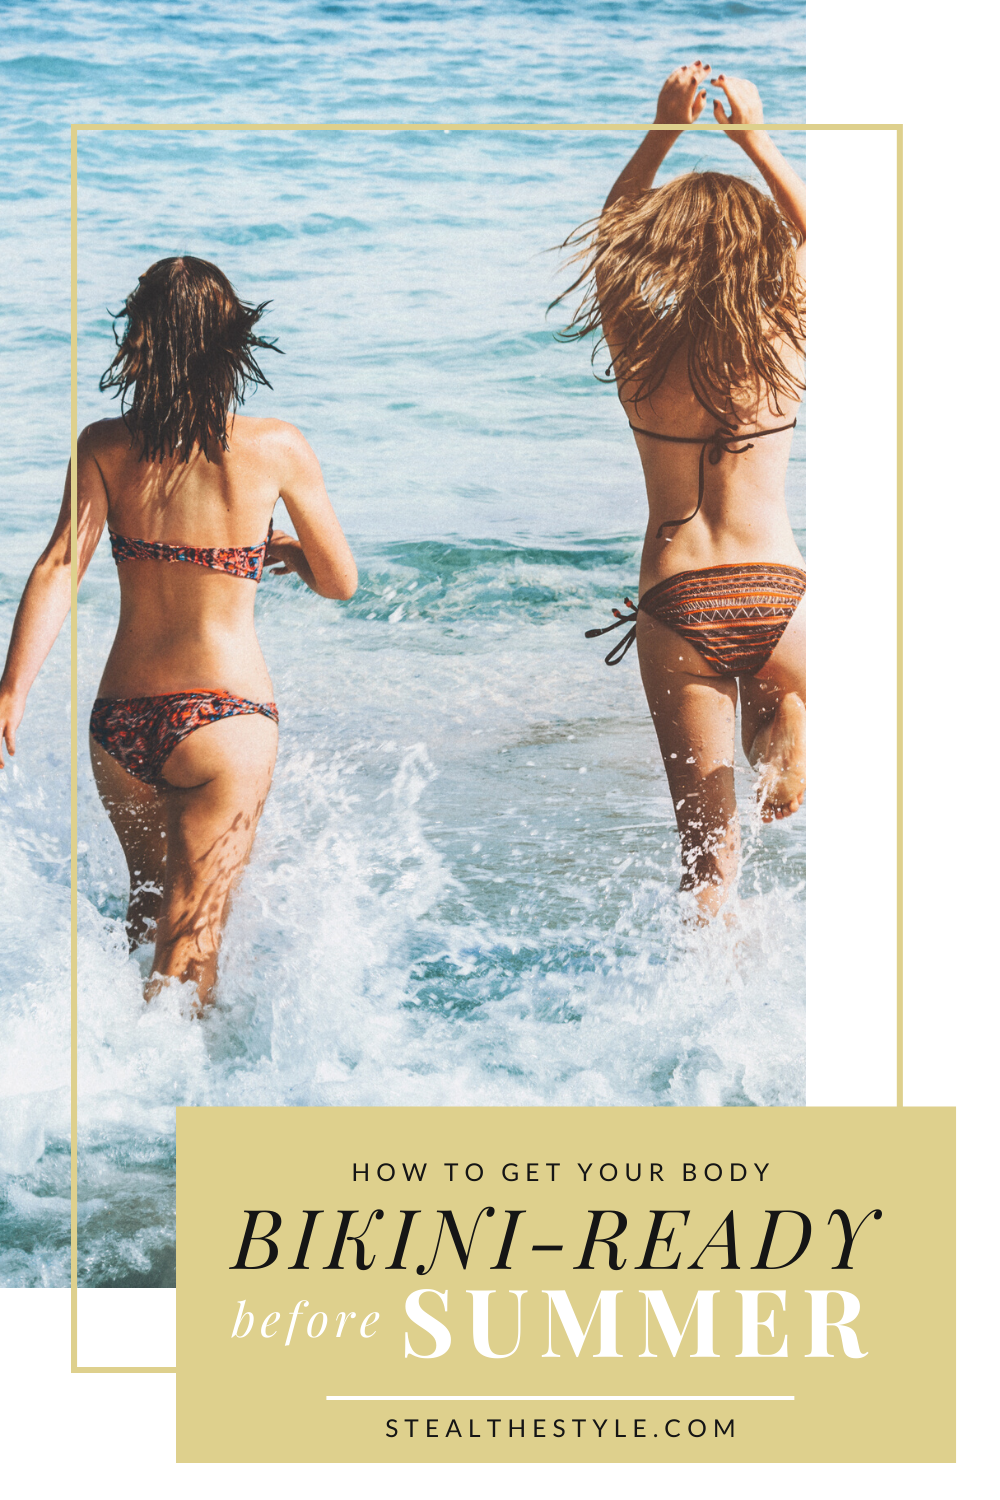 How to Get Your Body Bikini-Ready Before Summer